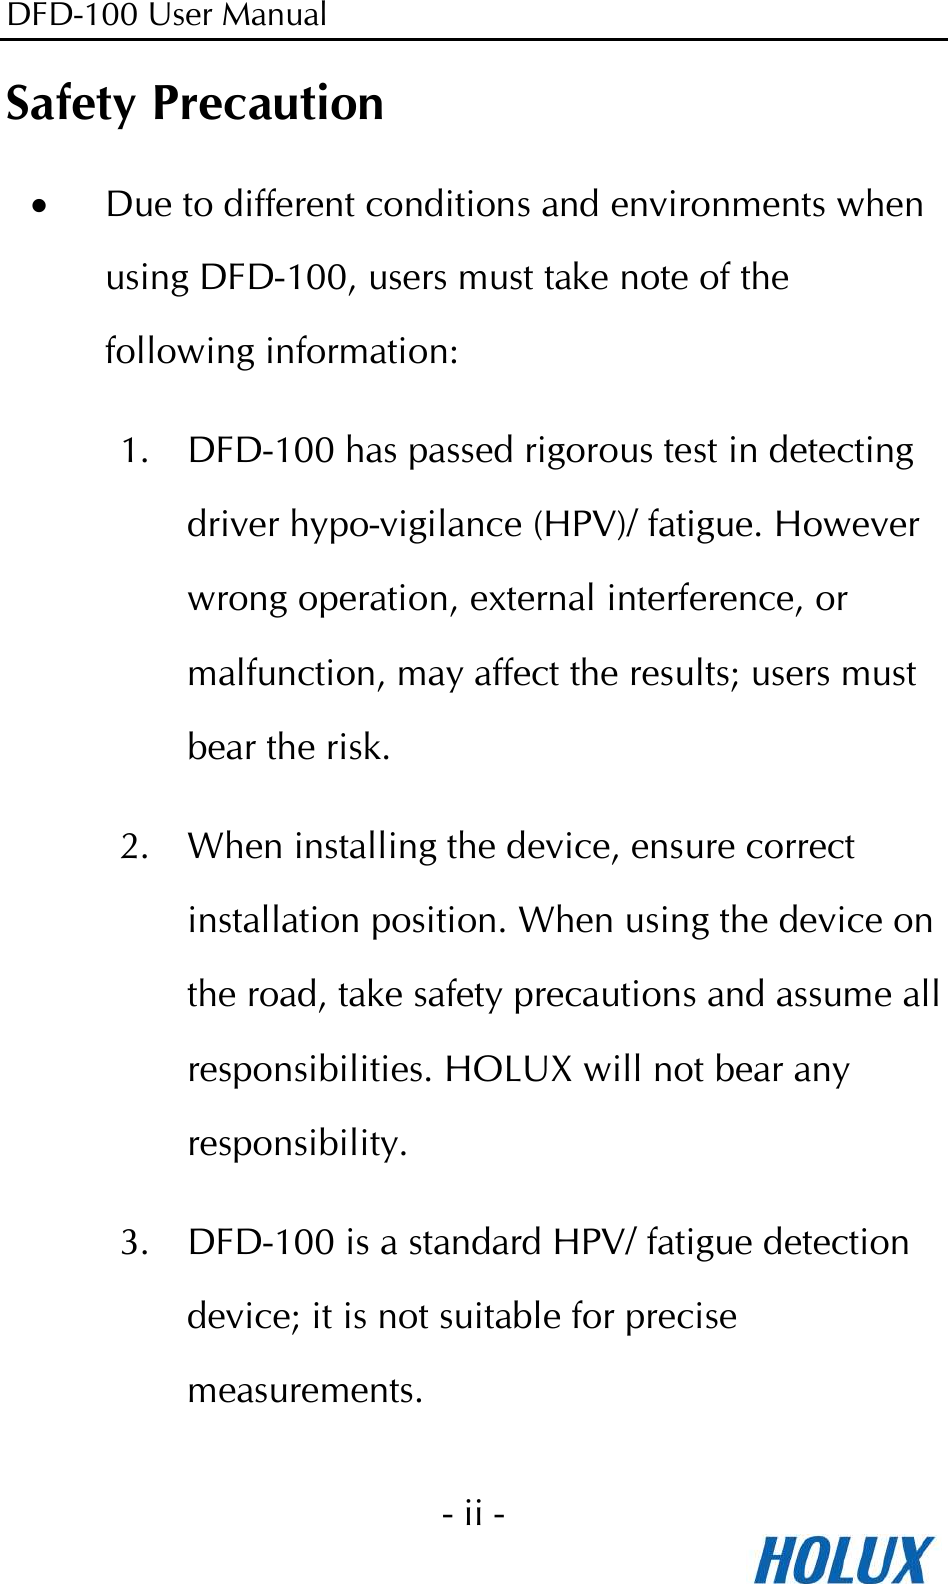 DFD-100 User Manual - ii -  Safety Precaution • Due to different conditions and environments when using DFD-100, users must take note of the following information: 1. DFD-100 has passed rigorous test in detecting driver hypo-vigilance (HPV)/ fatigue. However wrong operation, external interference, or malfunction, may affect the results; users must bear the risk. 2. When installing the device, ensure correct installation position. When using the device on the road, take safety precautions and assume all responsibilities. HOLUX will not bear any responsibility. 3. DFD-100 is a standard HPV/ fatigue detection device; it is not suitable for precise measurements. 